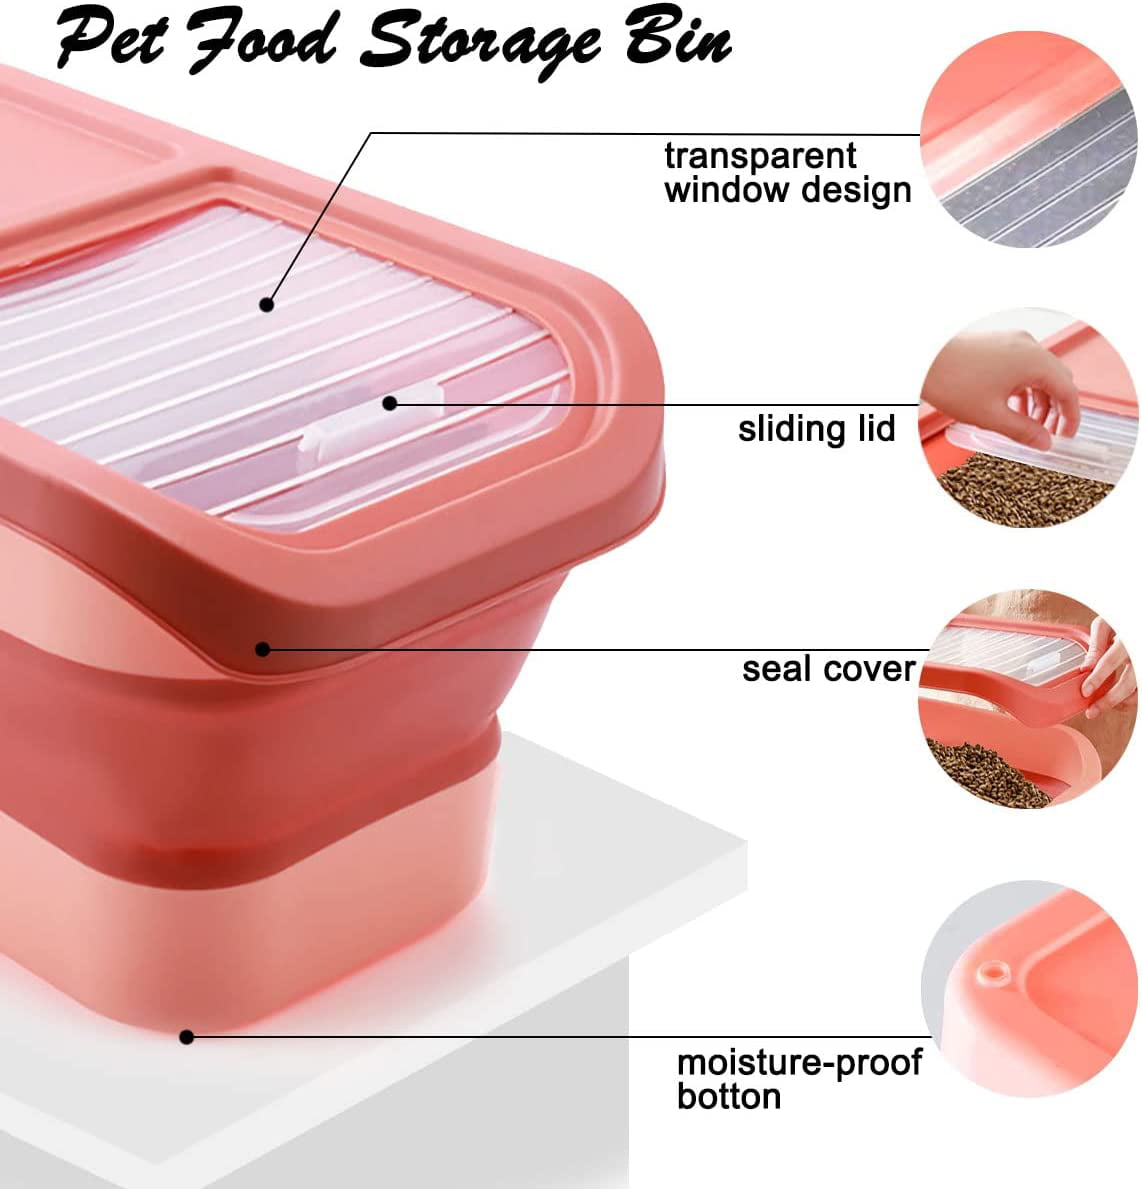 CDOKY Foldable Dog Food Storage Container, Bin for 30lb Pet Food Cat Food Fish Food with Measuring Cup, Sealed Lid, Wheels Large Airtight Plastic